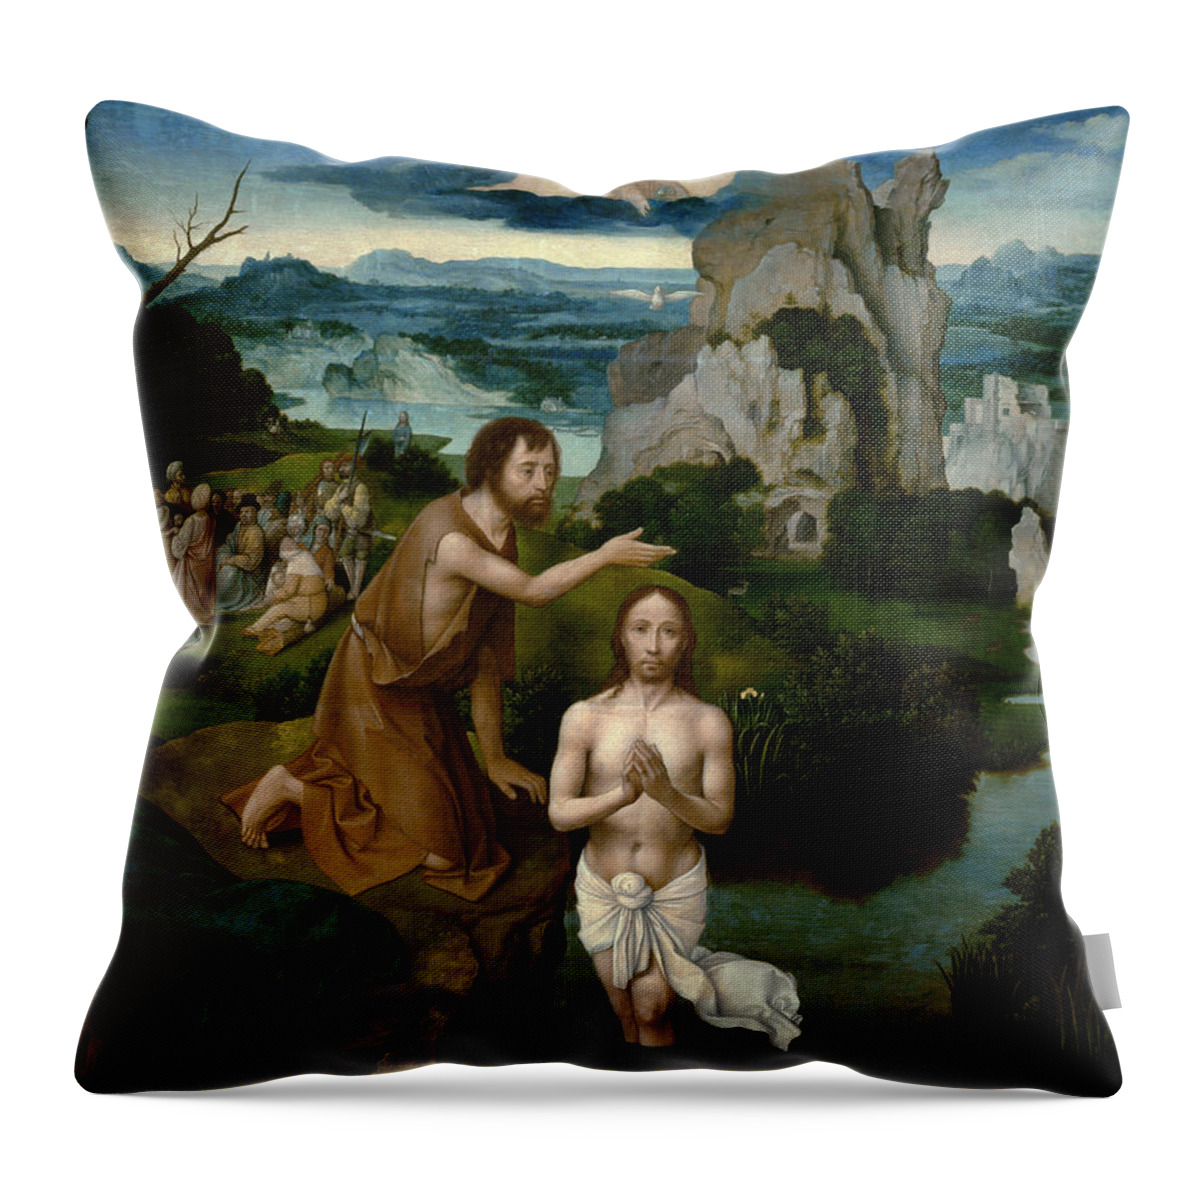 Joachim Patinir Throw Pillow featuring the painting The Baptism of Christ by Joachim Patinir